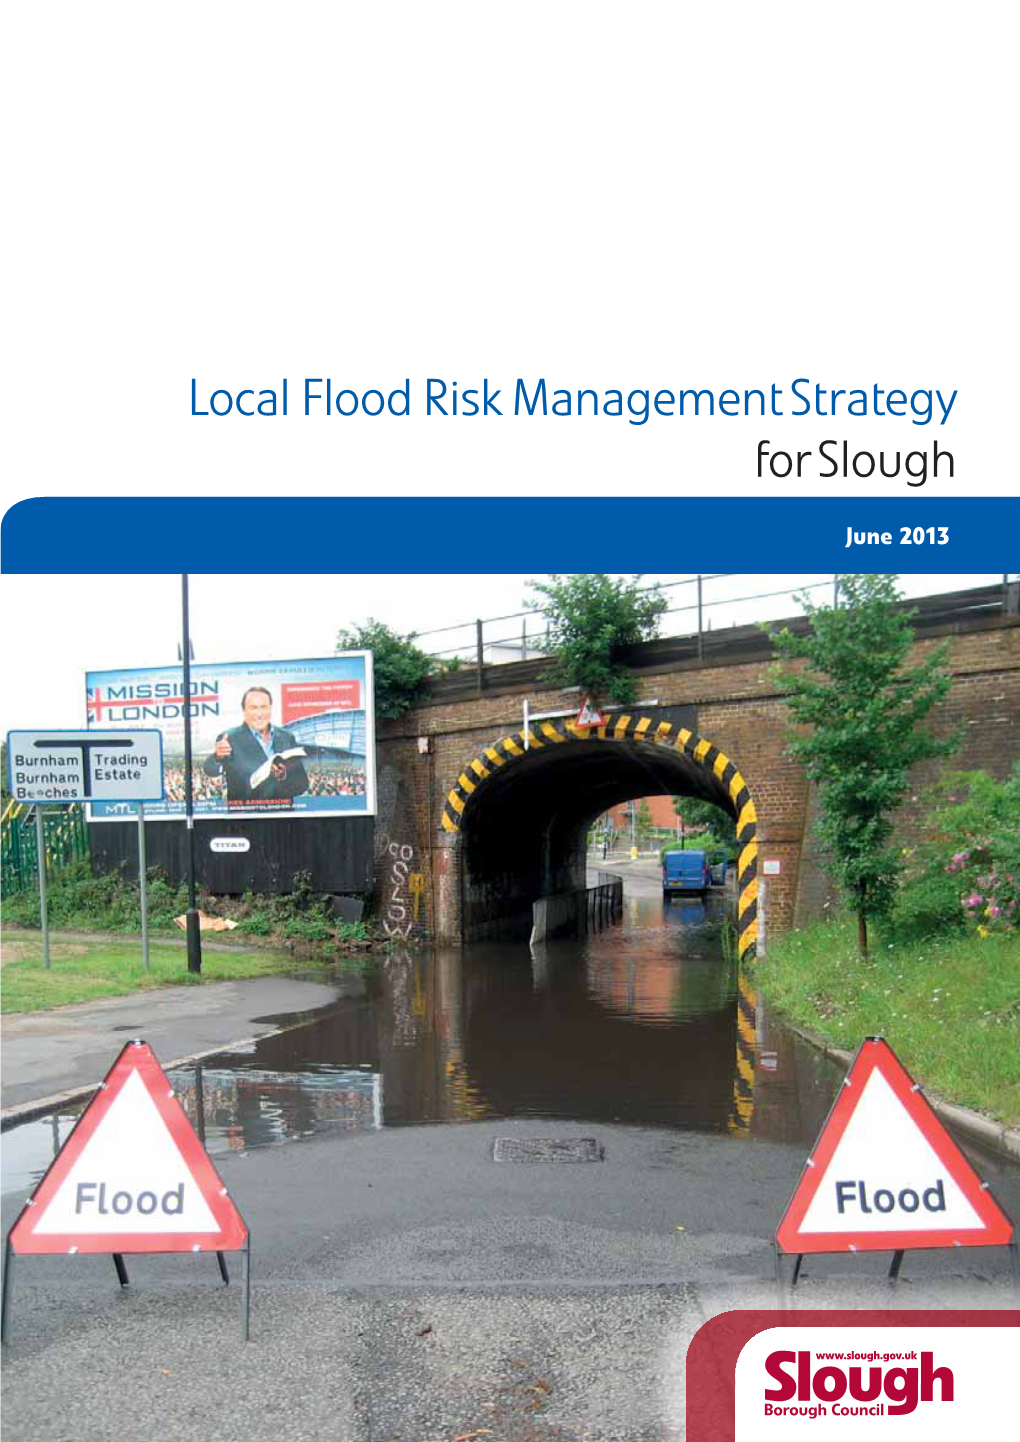 Local Flood Risk Management Strategy for Slough